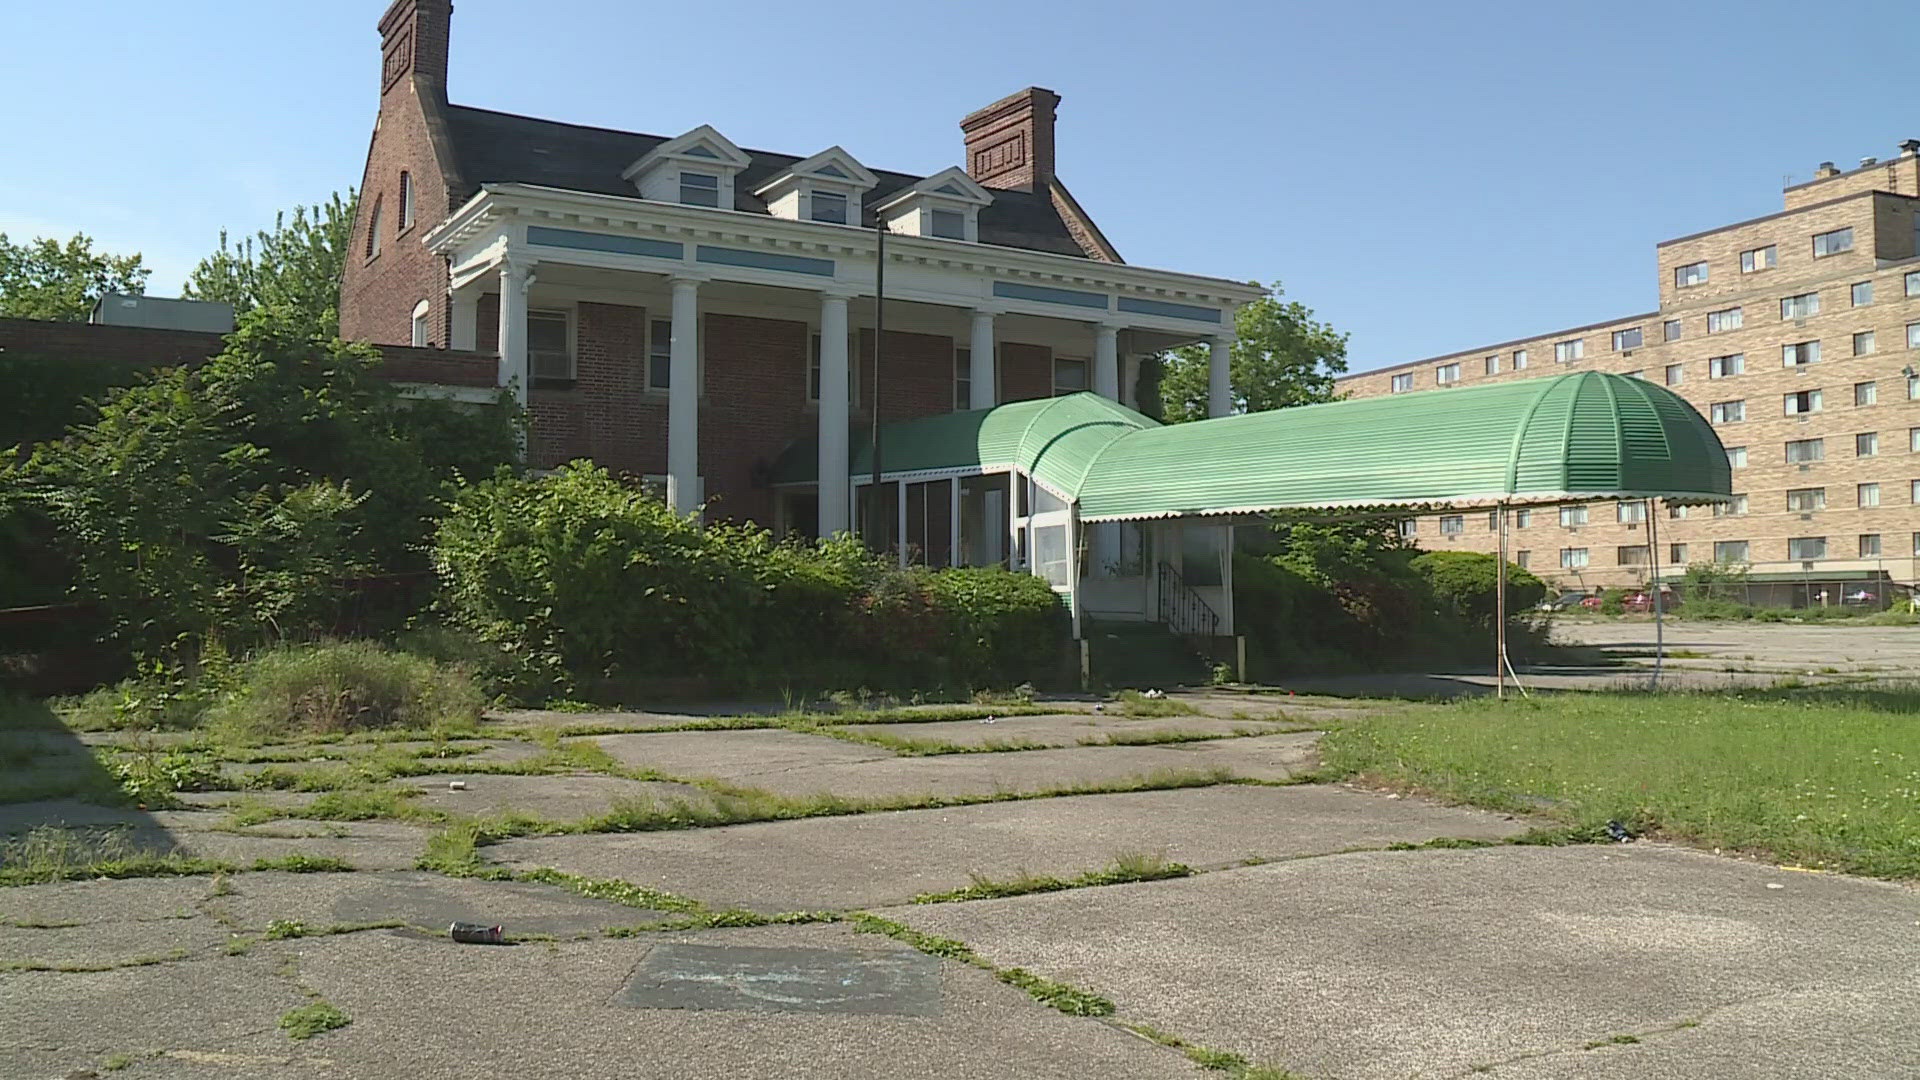 The body was found behind an abandoned funeral home at 15357 Euclid Avenue.